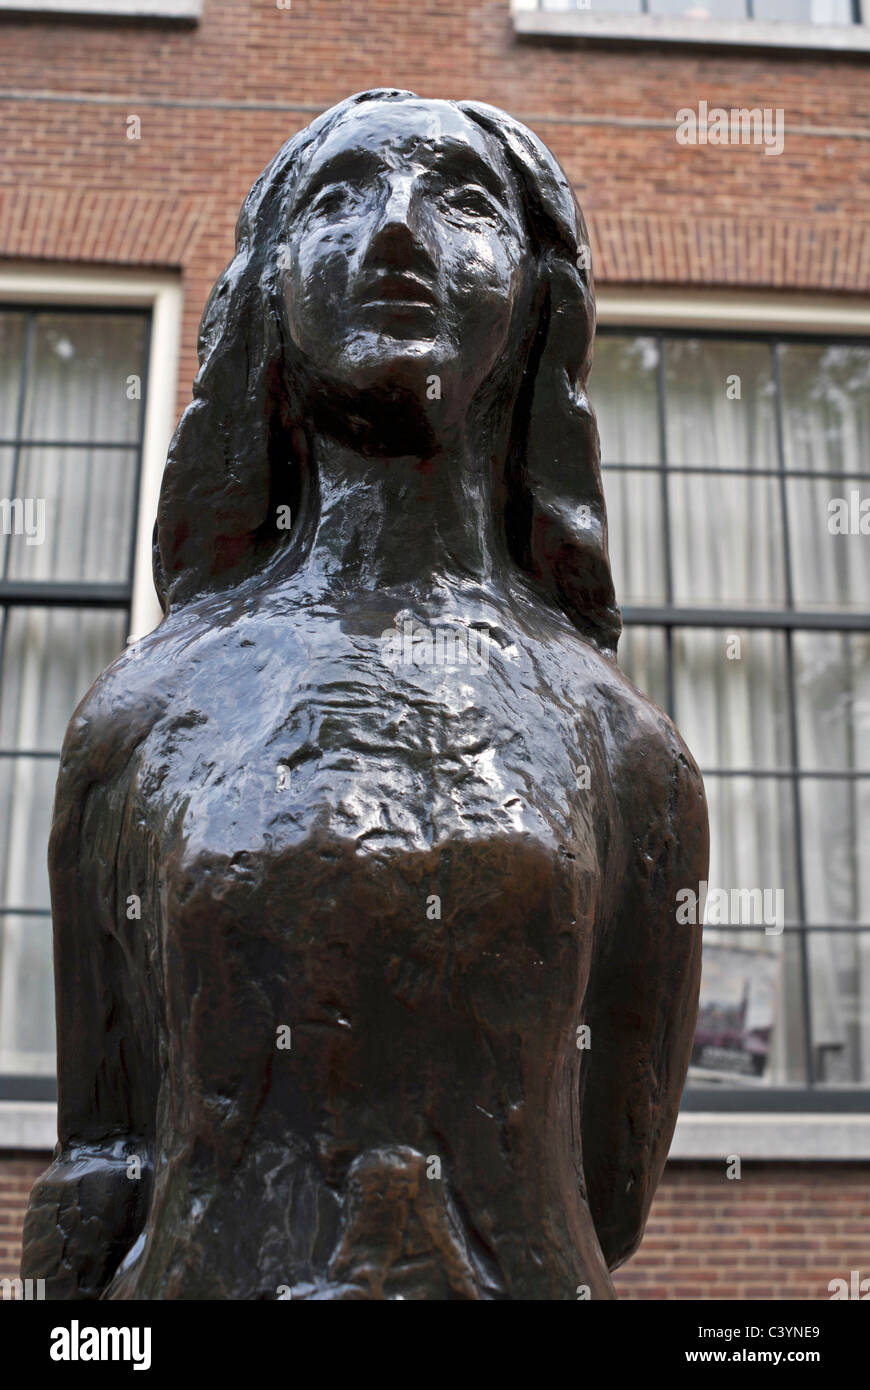 Statue of Anne Frank, in the Westermarkt area of Amsterdam, Netherlands Stock Photo